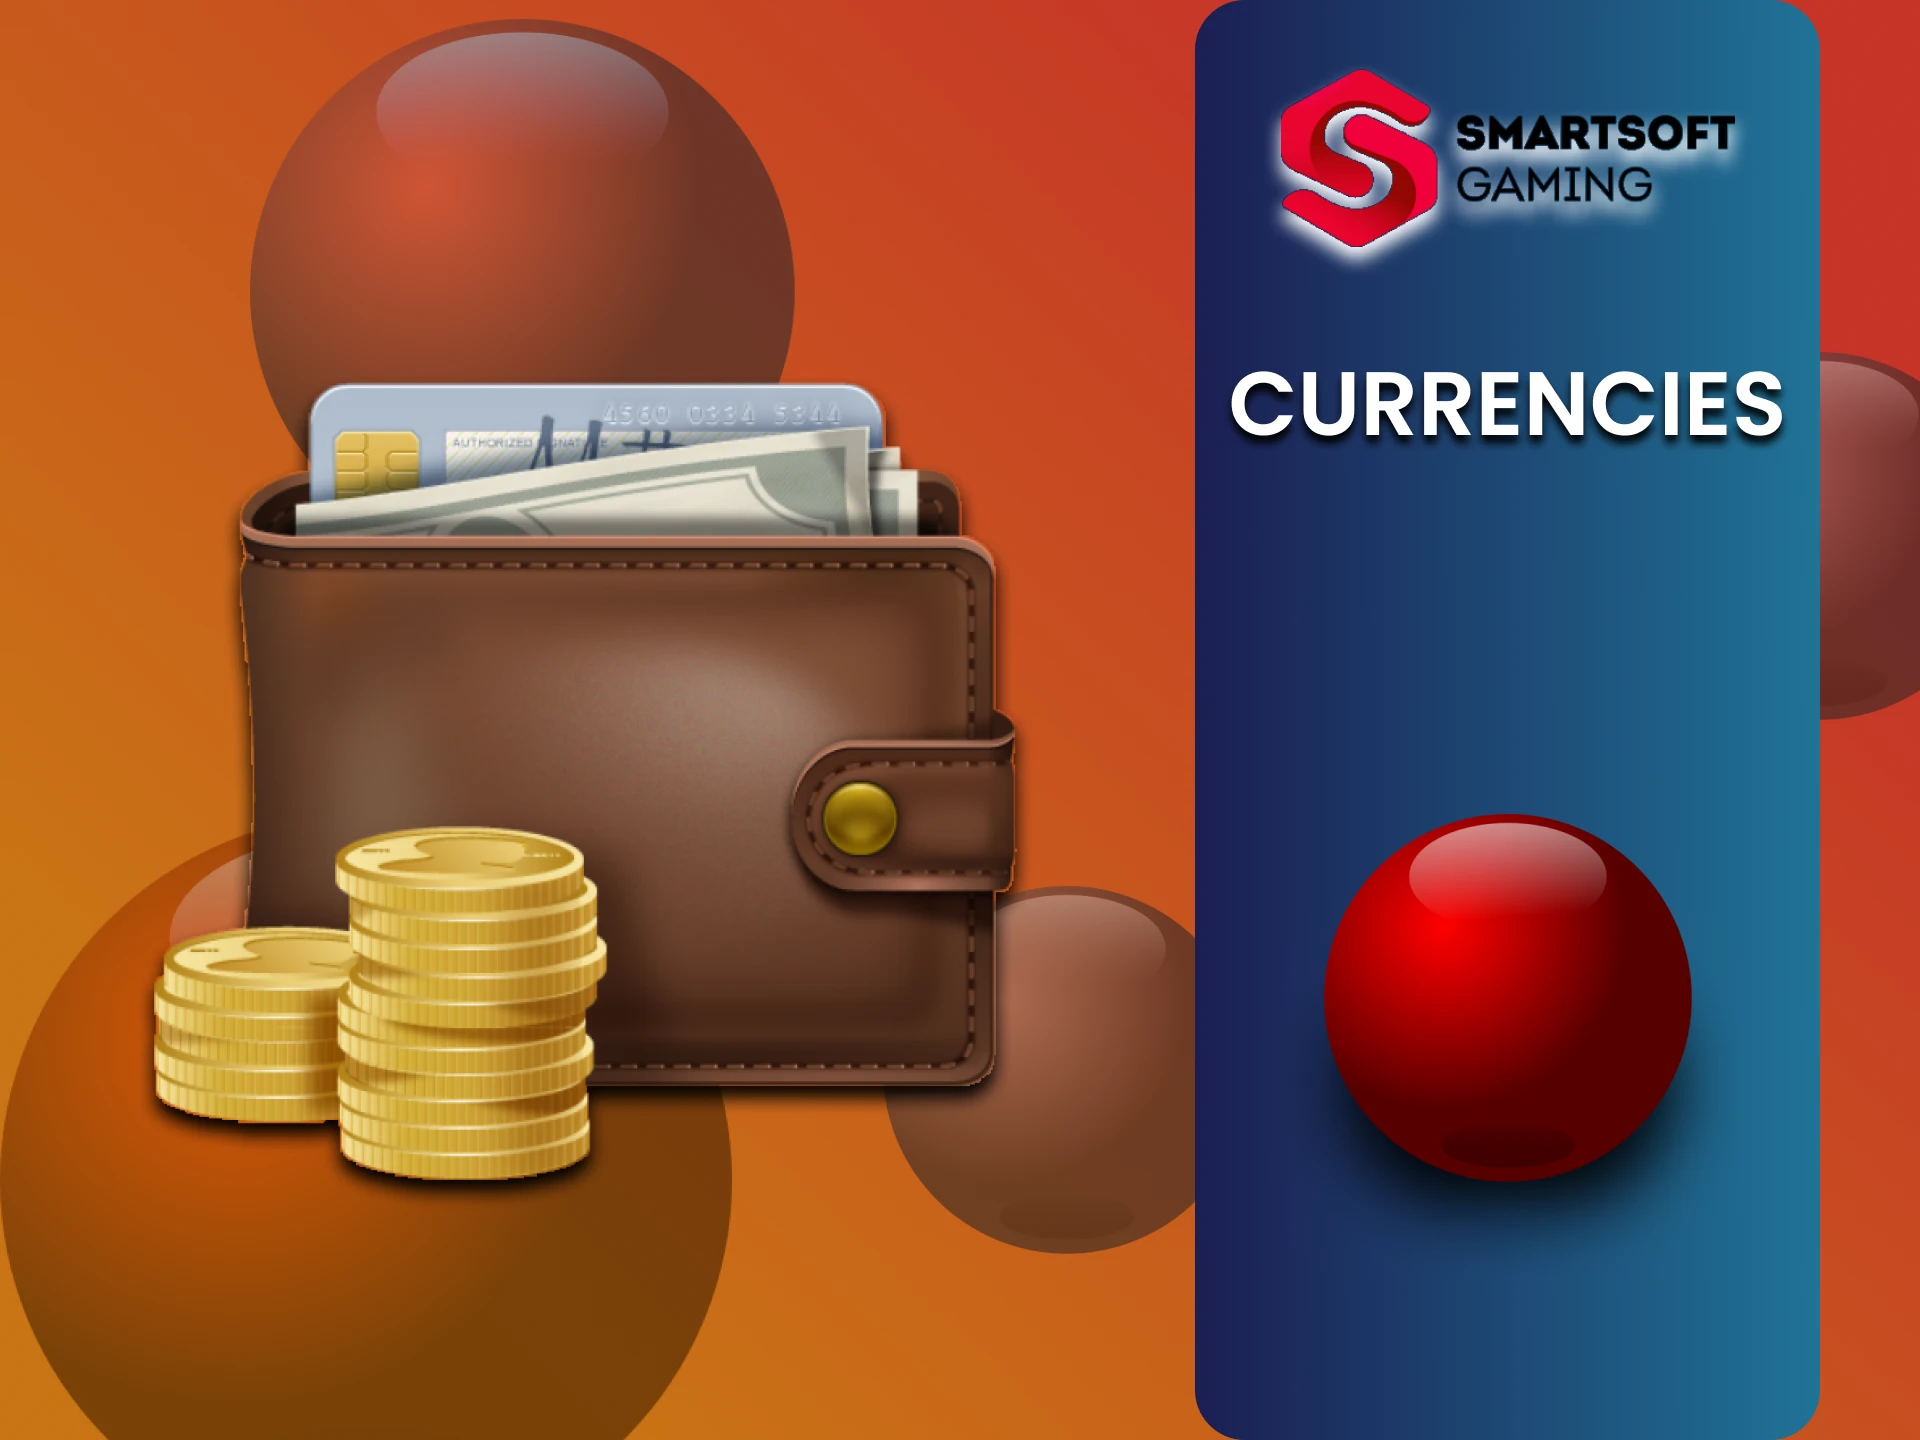 We will tell you what currencies are used in games from Smartsoft.